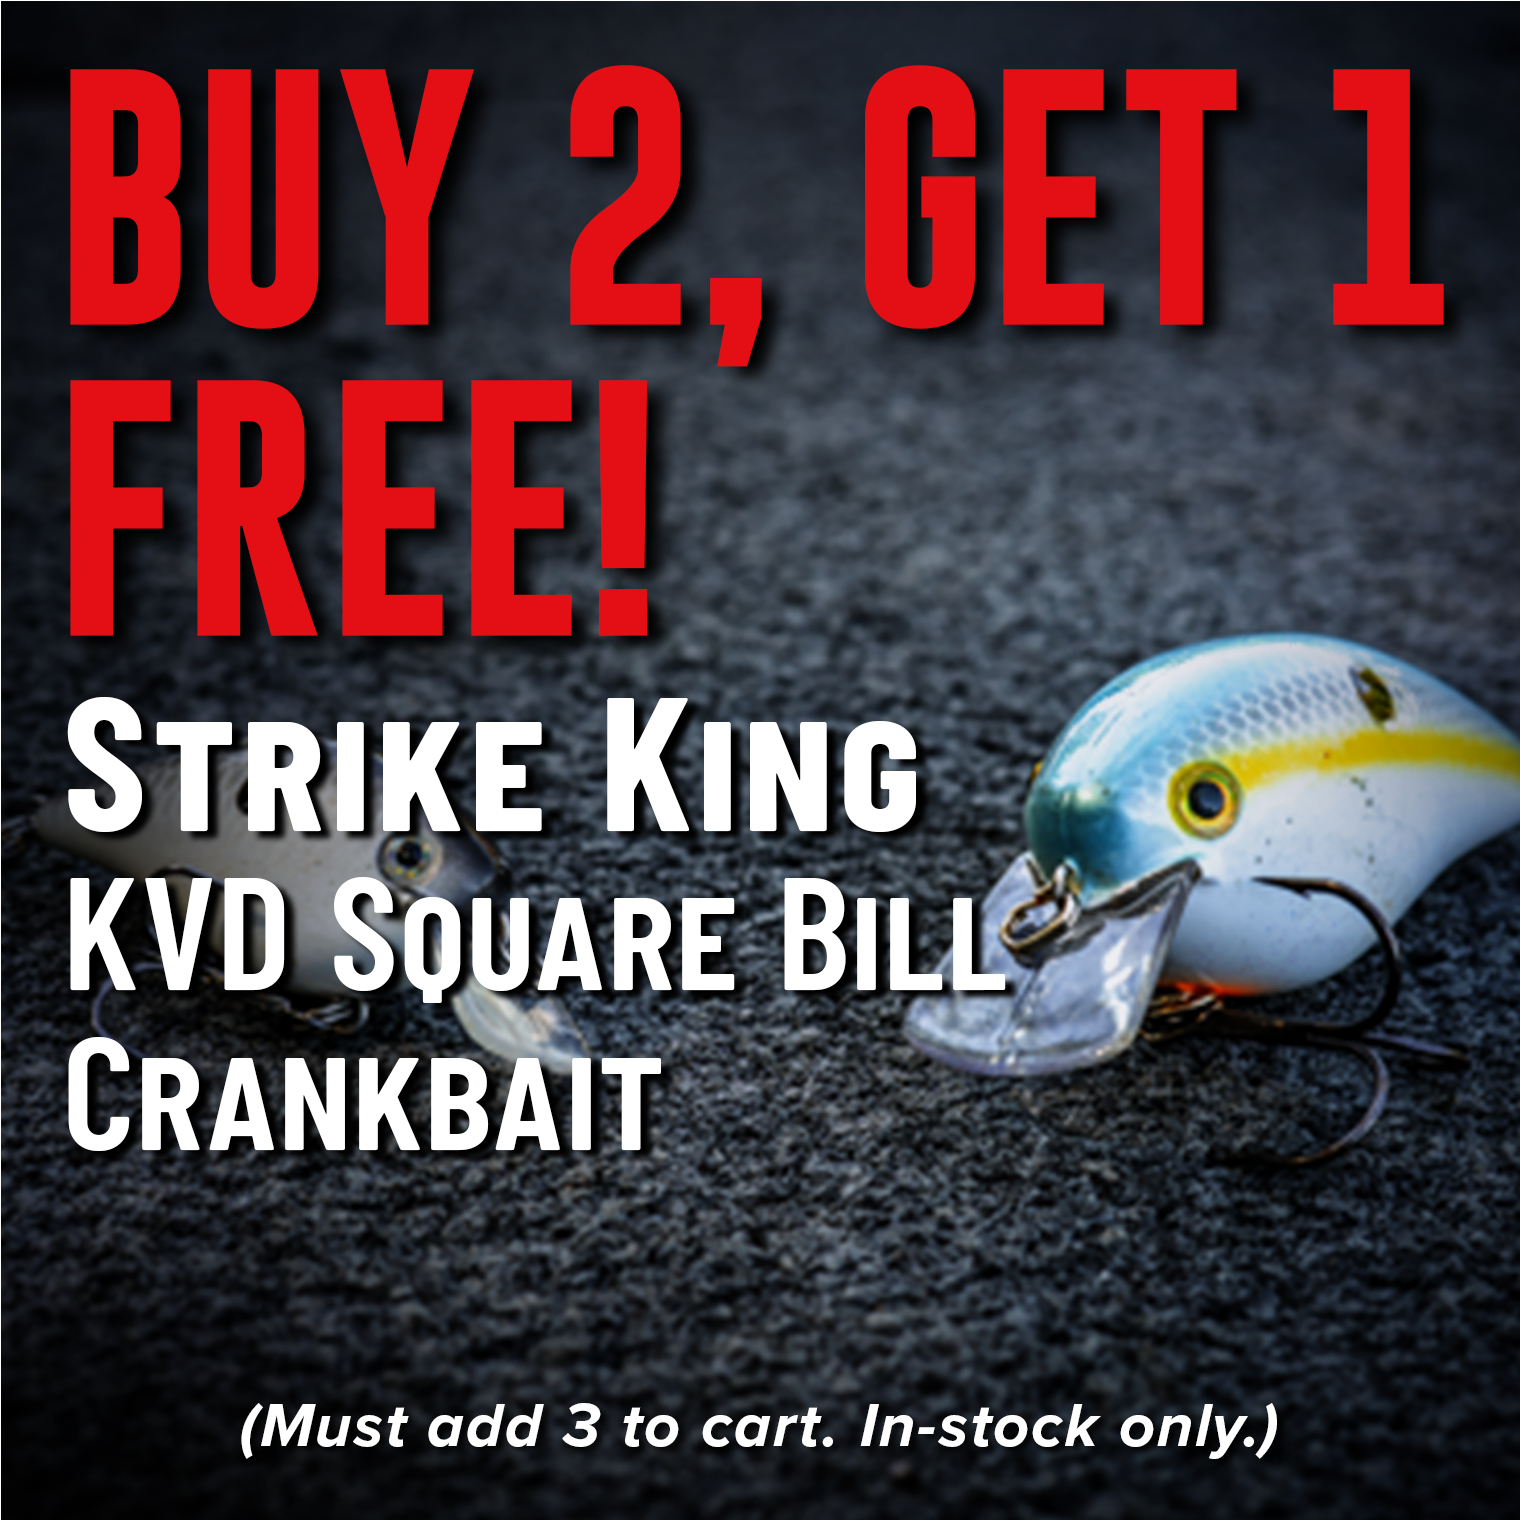 Buy 2, Get 1 Free! Strike King KVD Square Bill Crankbait (Must add 3 to cart. In-stock only.)